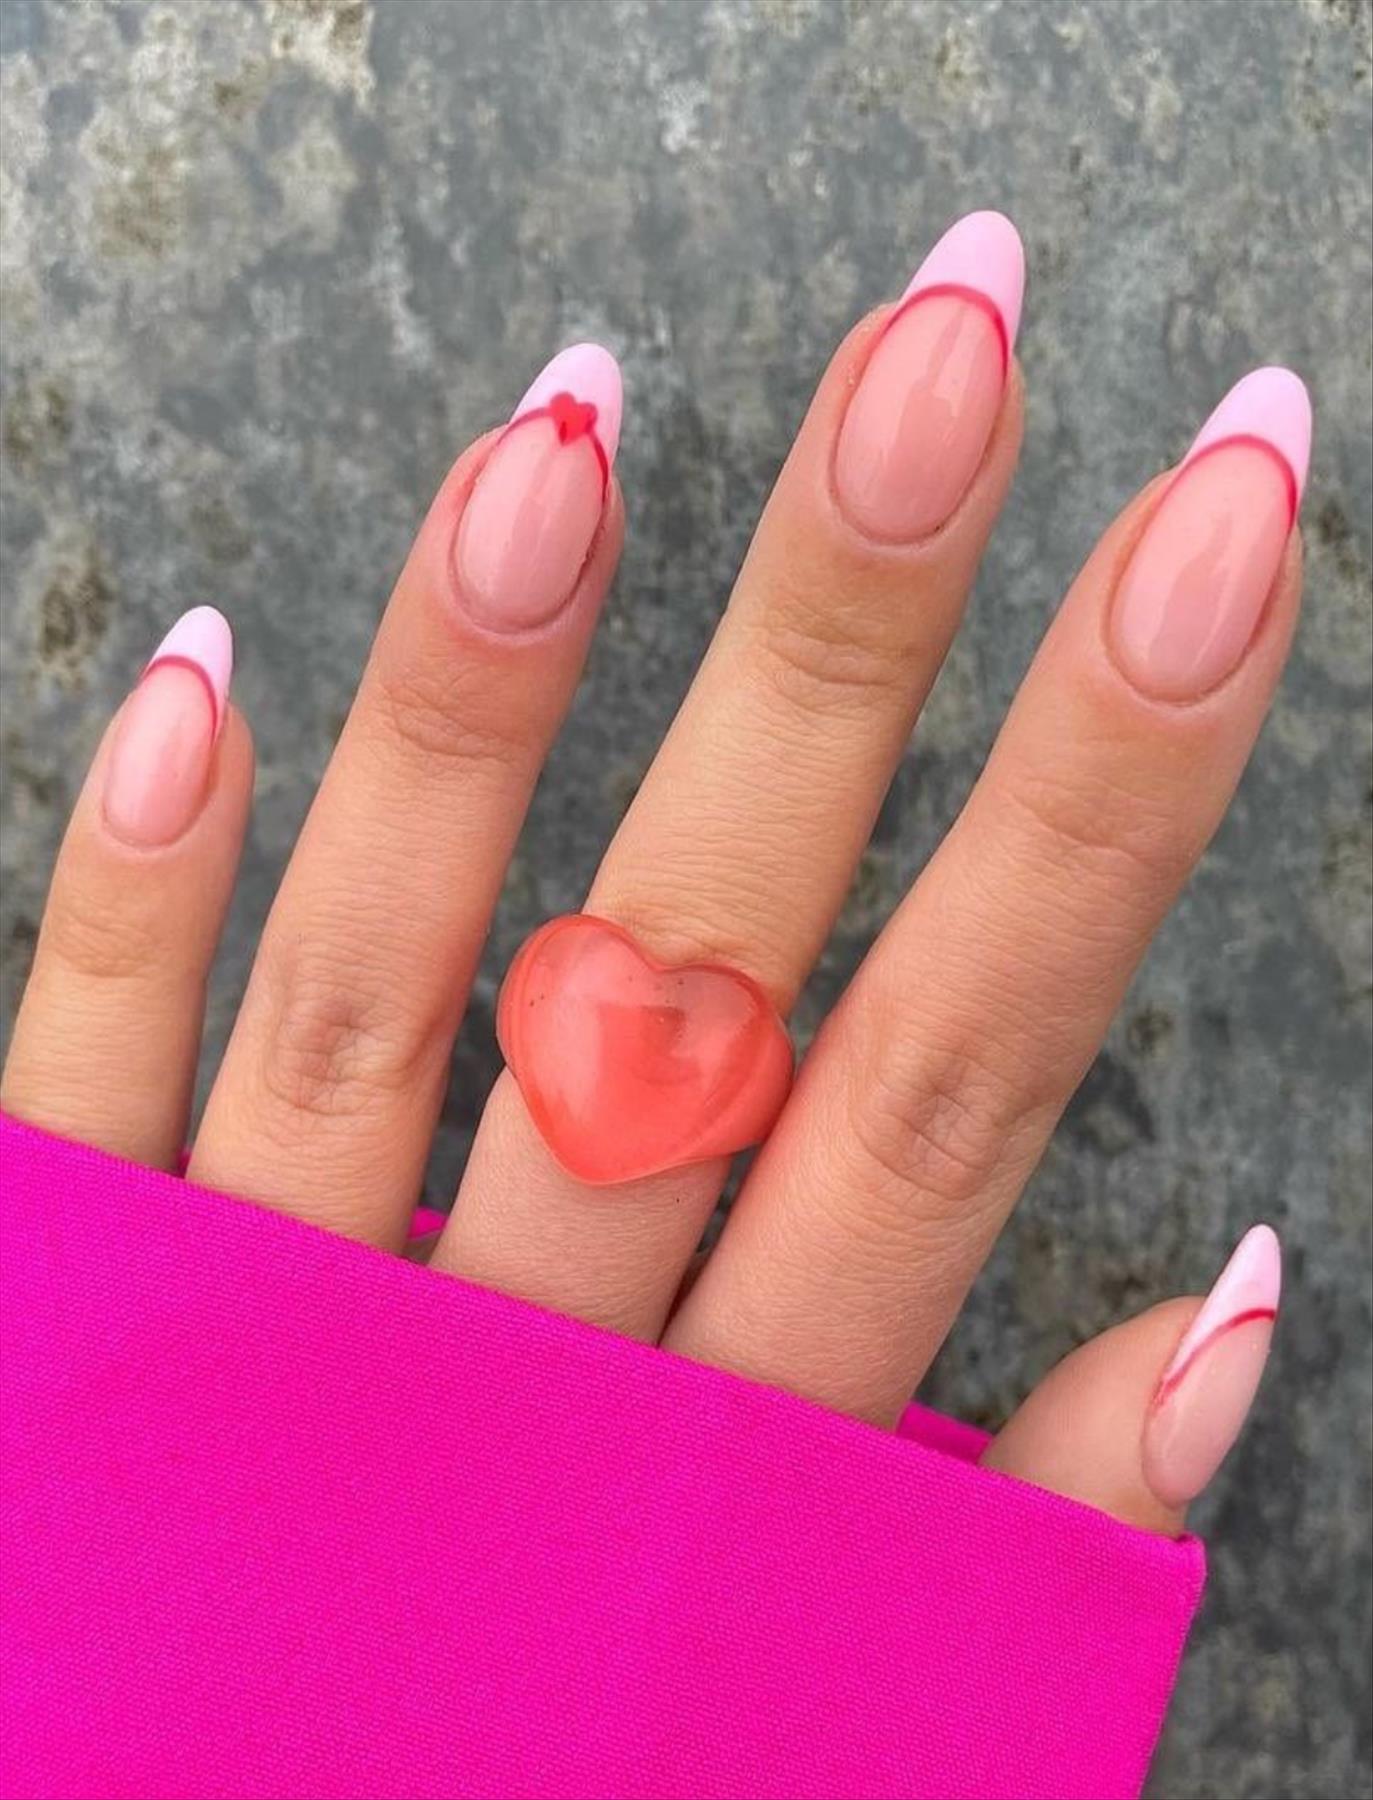 Best Valentine's day nails design Perfect for your date